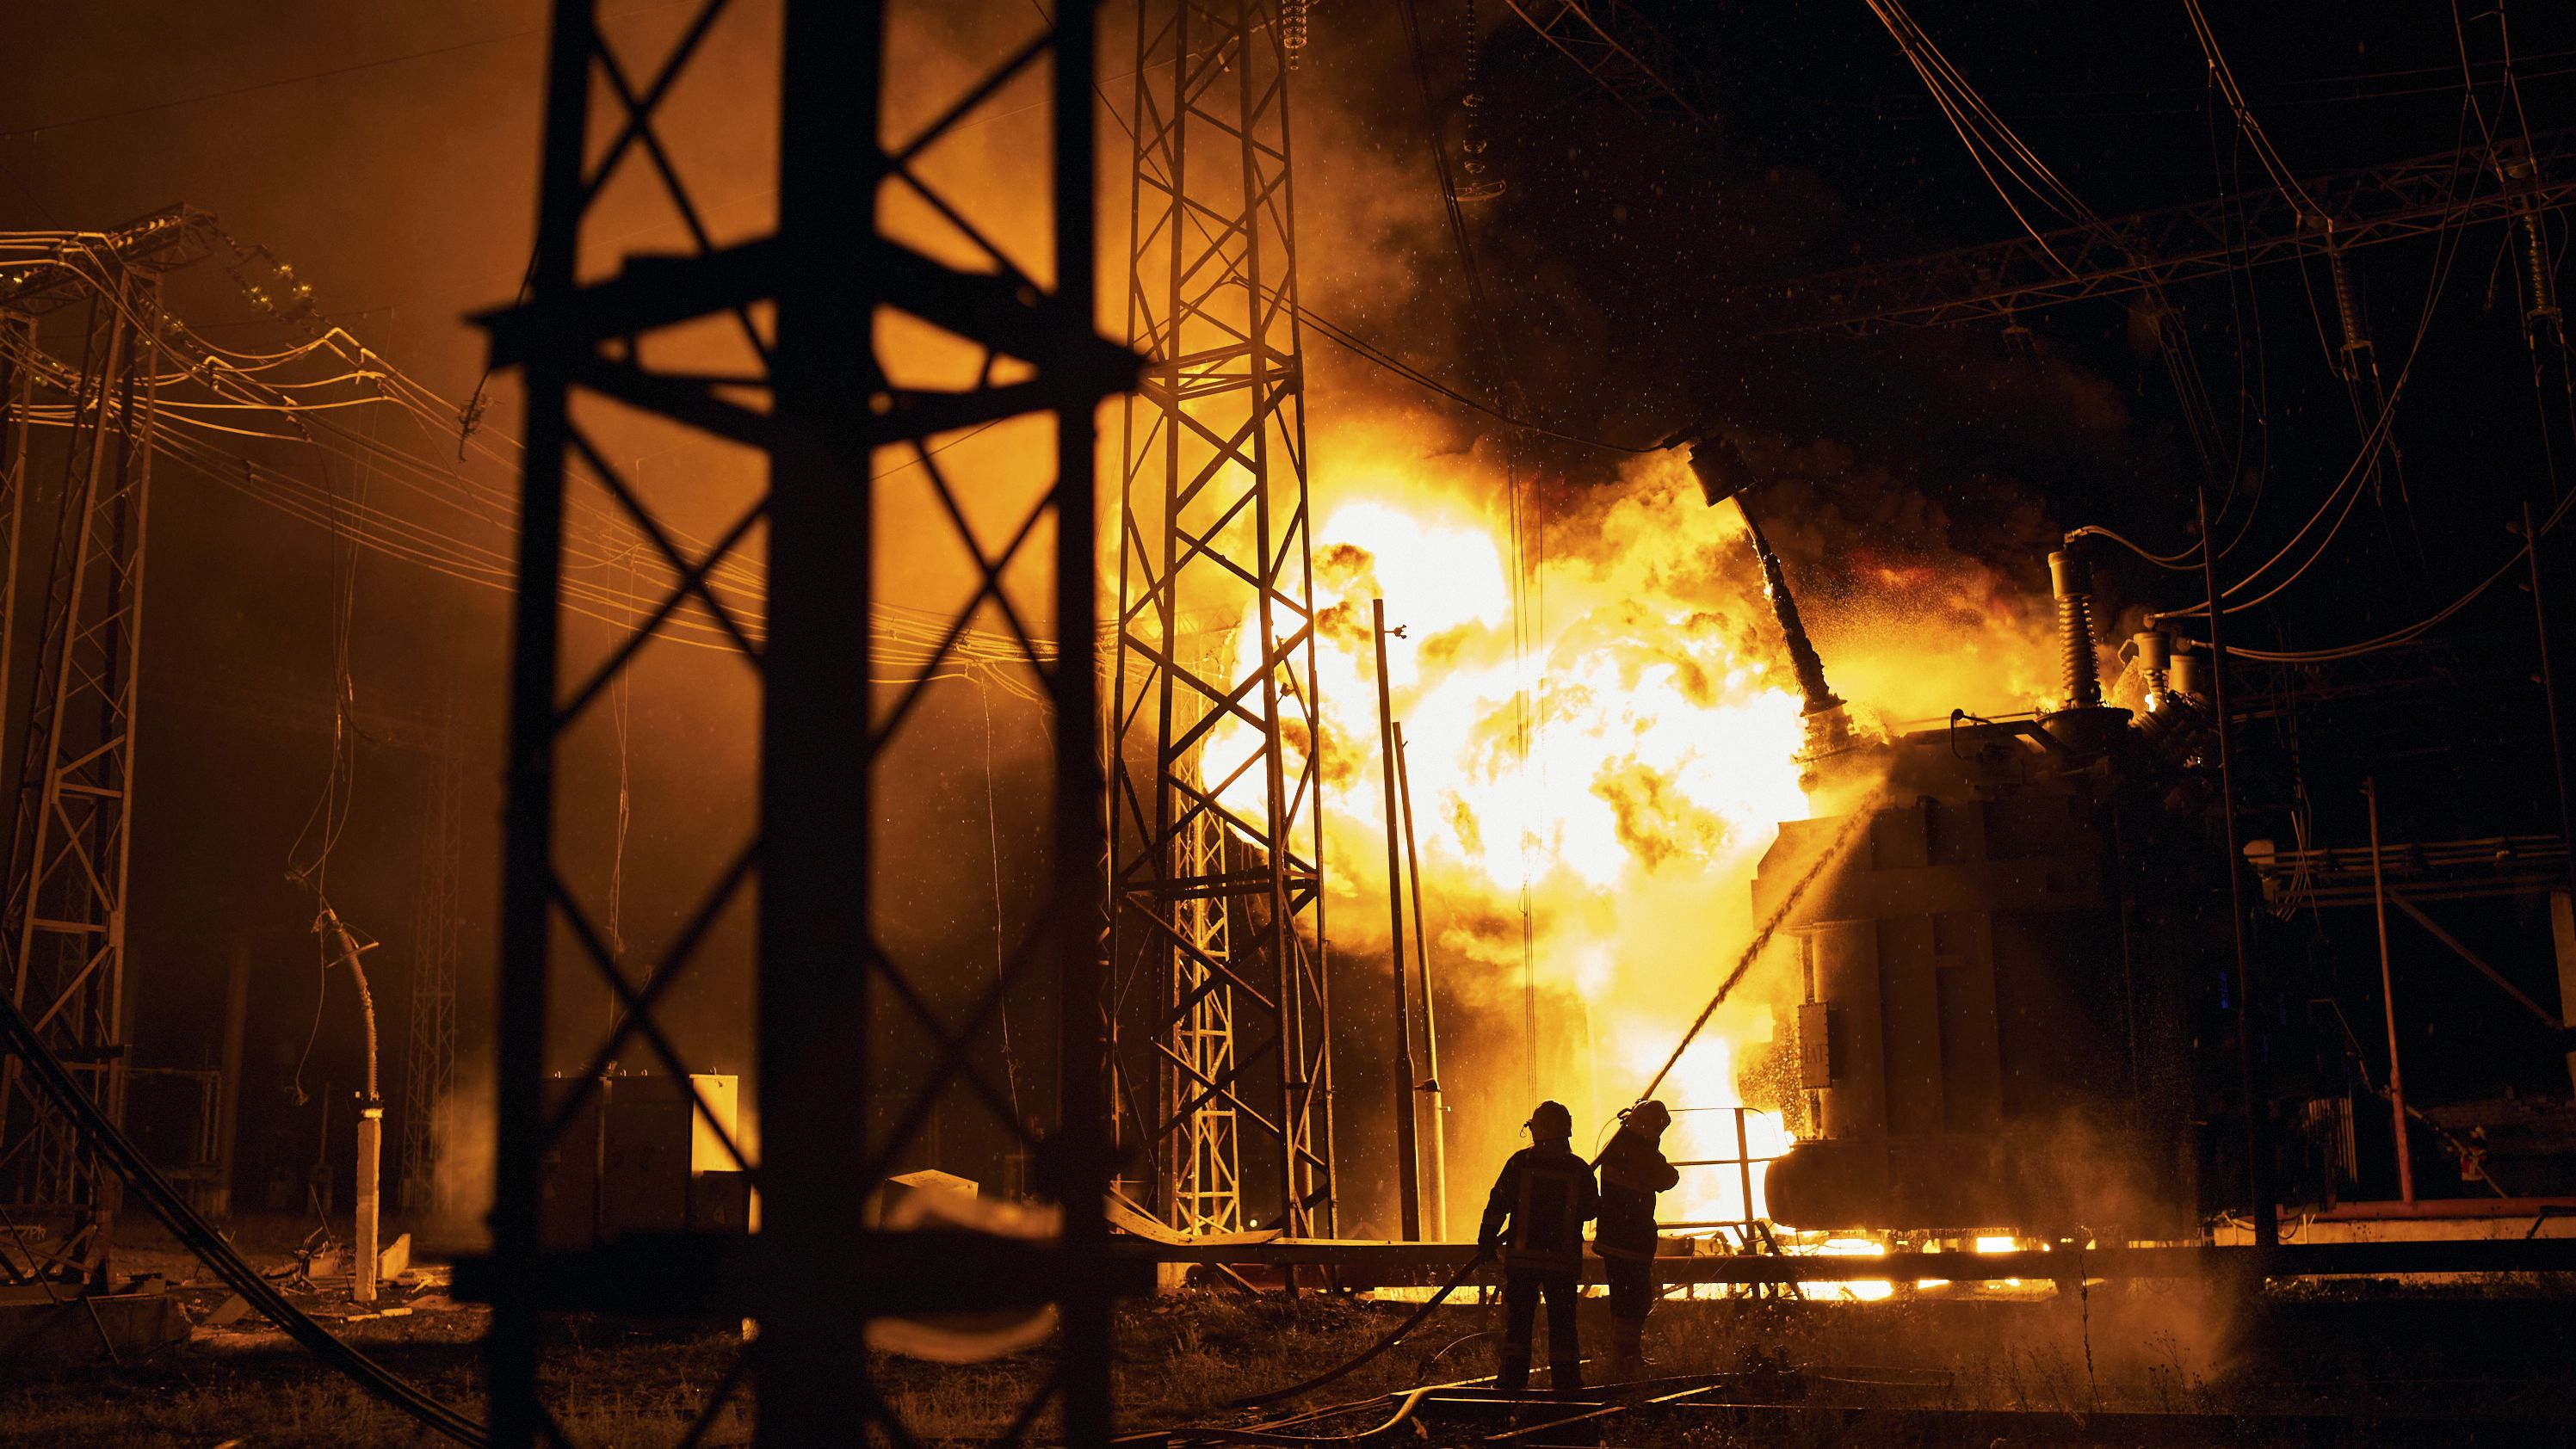 Ukrainian State Emergency Service firefighters put out a fire after a Russian rocket attack hit an electric power station in Kharkiv, Ukraine, on September 11.